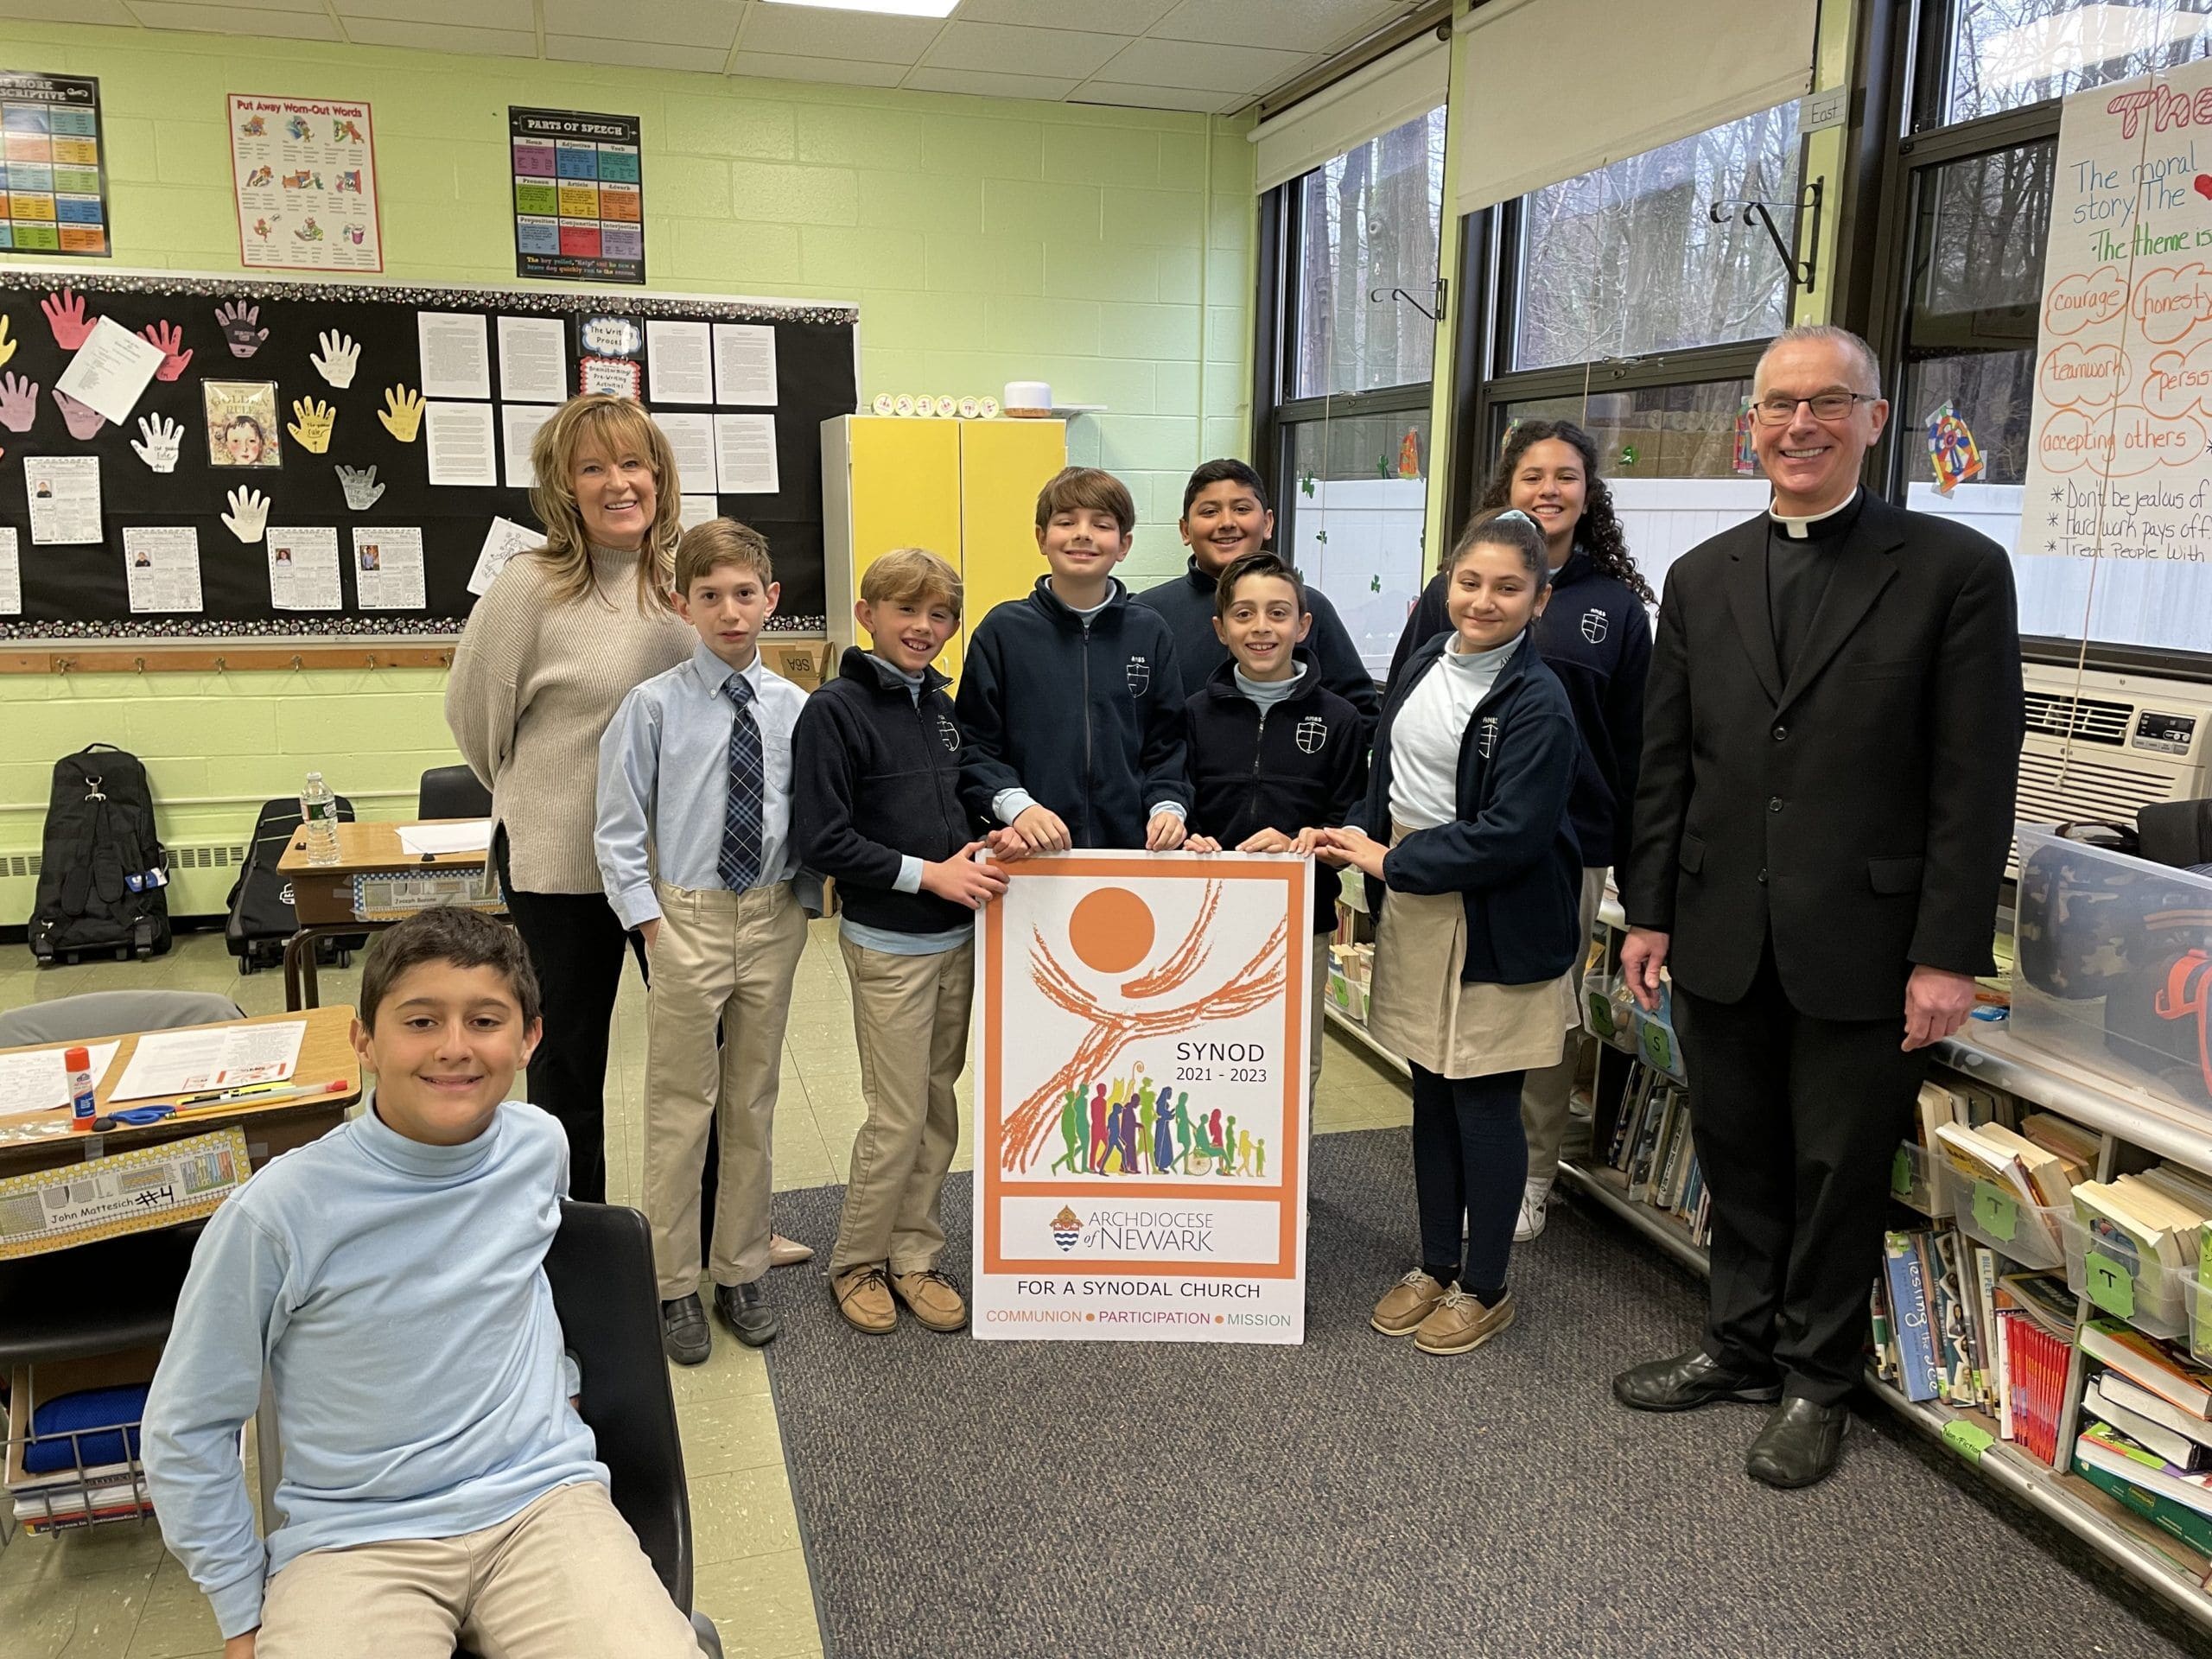 Father John Job, the pastor of Church of the Most Blessed Sacrament in Franklin Lakes, N.J., is pictured with students in Mrs. Brizzolara’s fifth grade class at The Academy of the Most Blessed Sacrament who recently participated in a synod listening session. (Photo courtesy of Father John Job)